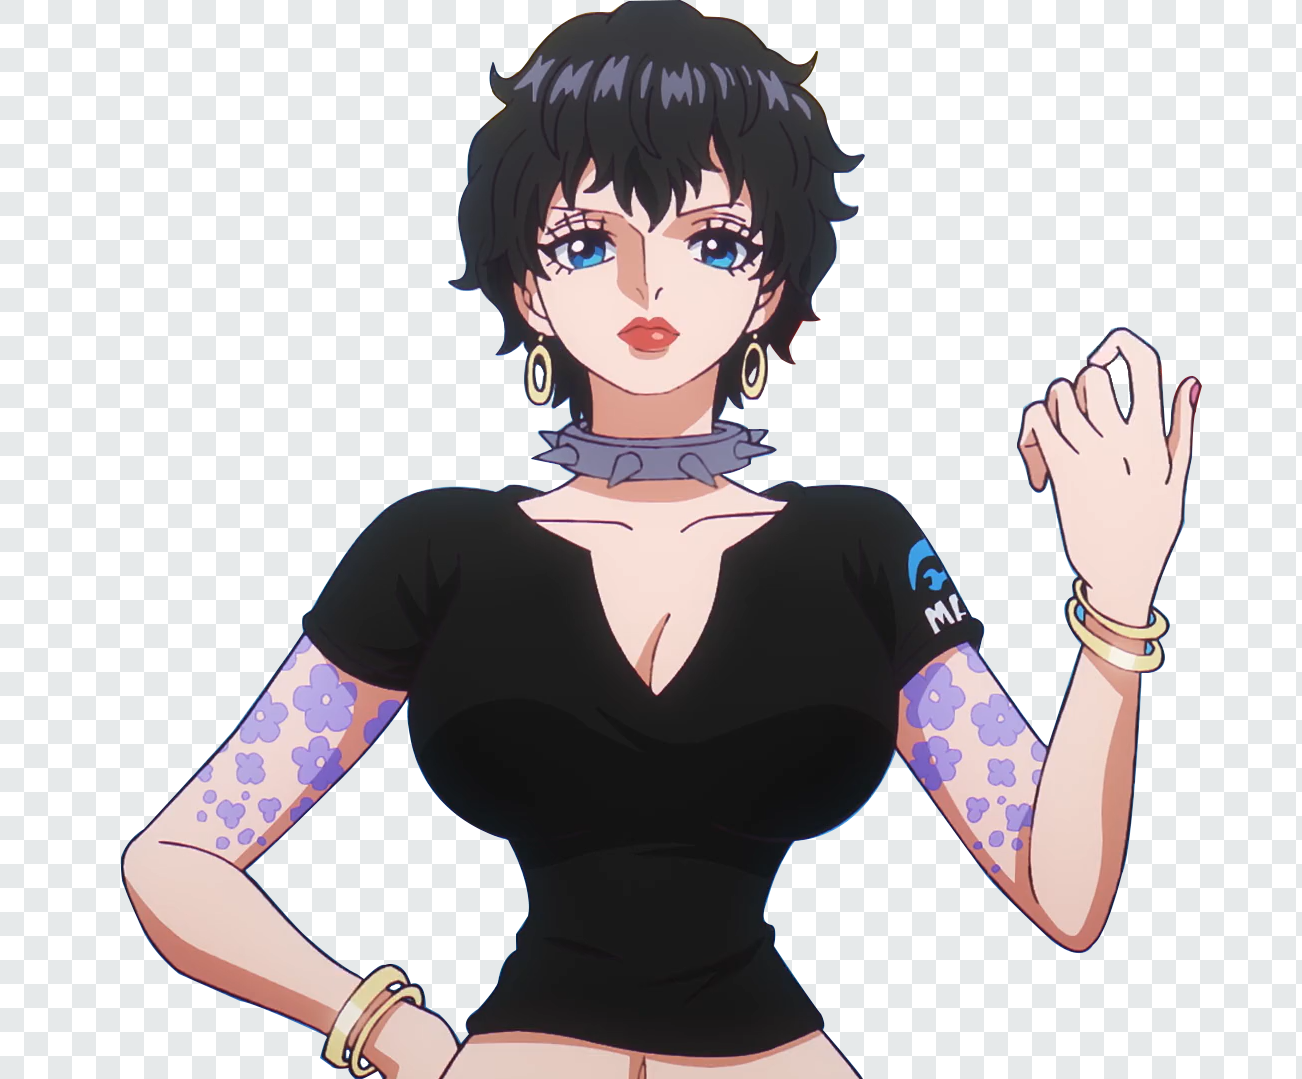 Vice Admiral Doll Transparent PNG from One Piece anime